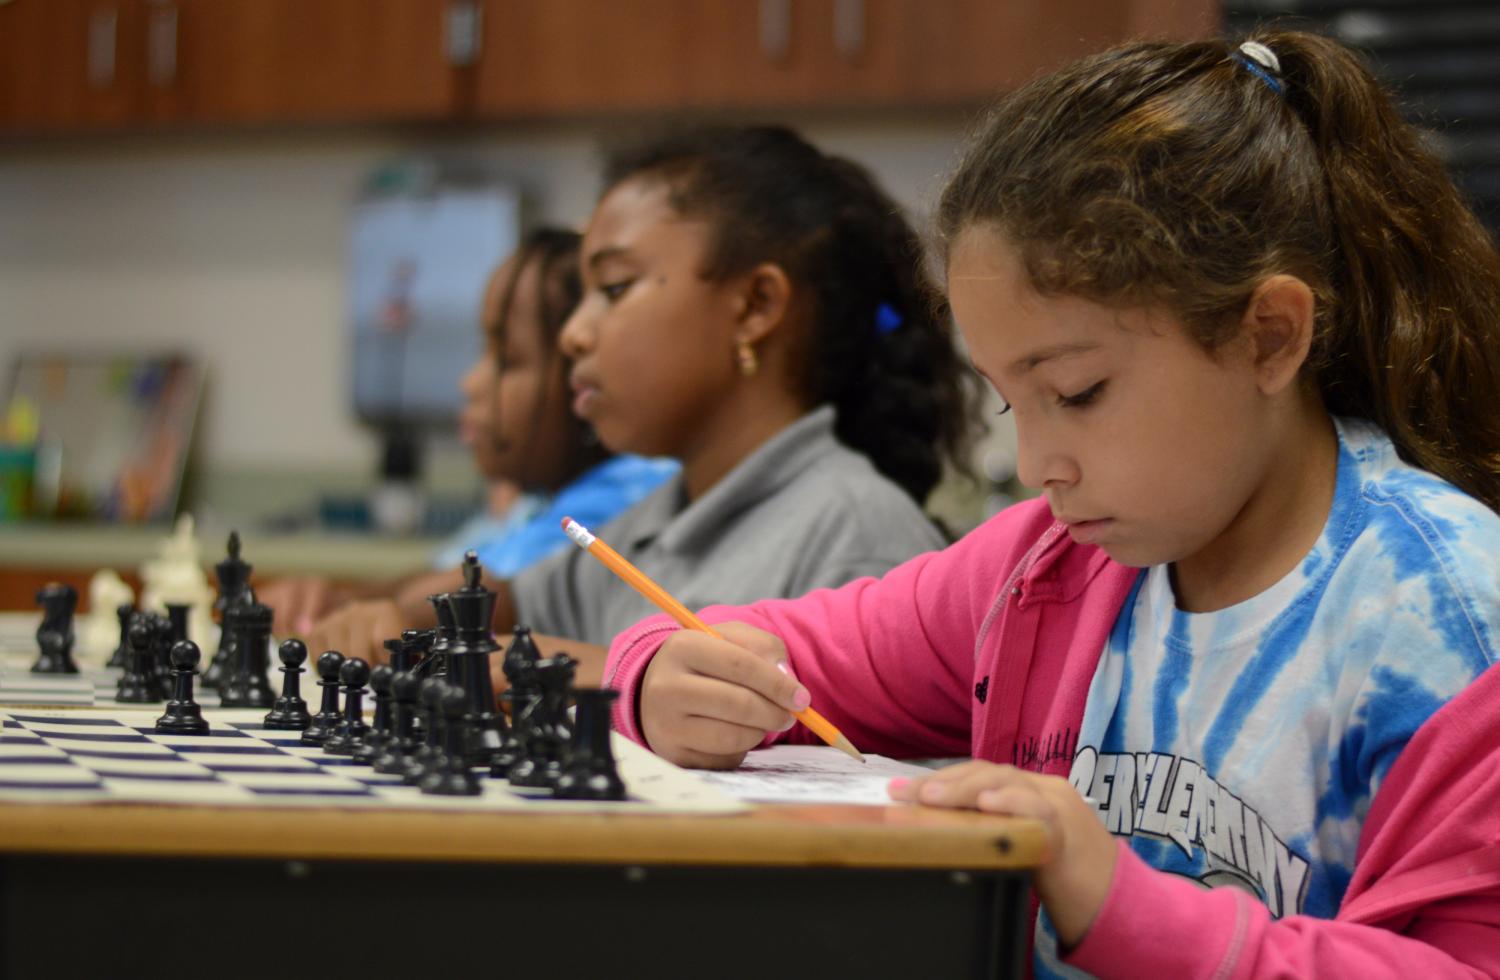 Hailey Rodelo participates in a chess-geography lesson at Discovery Elementary School in Sunrise, Florida